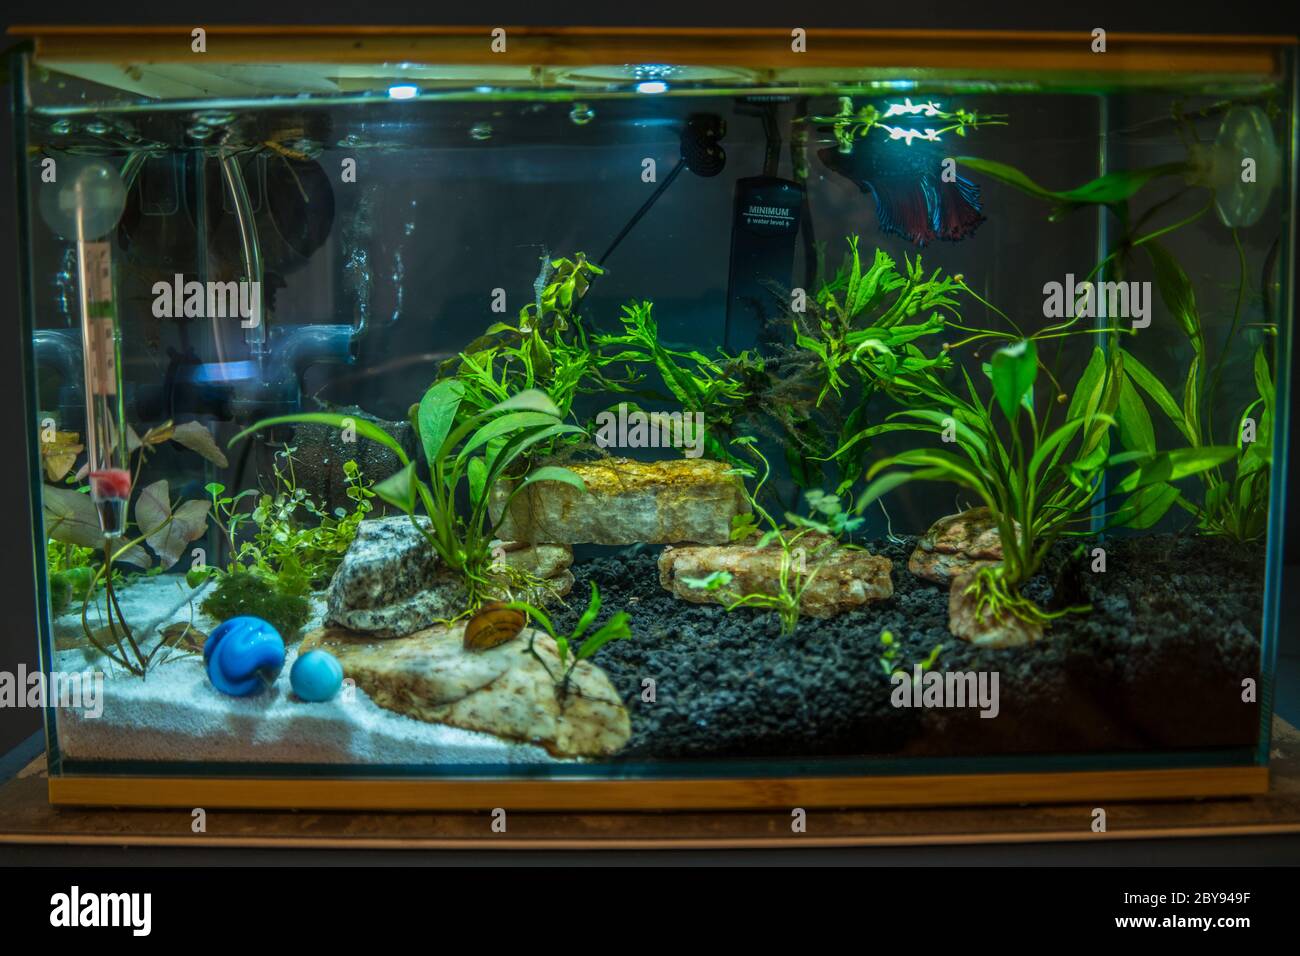 Three gallon betta or siamese fighting fish aquarium with live aquatic plants ghost shrimp snails rocks heater filtration sand substrate and led light Stock Photo